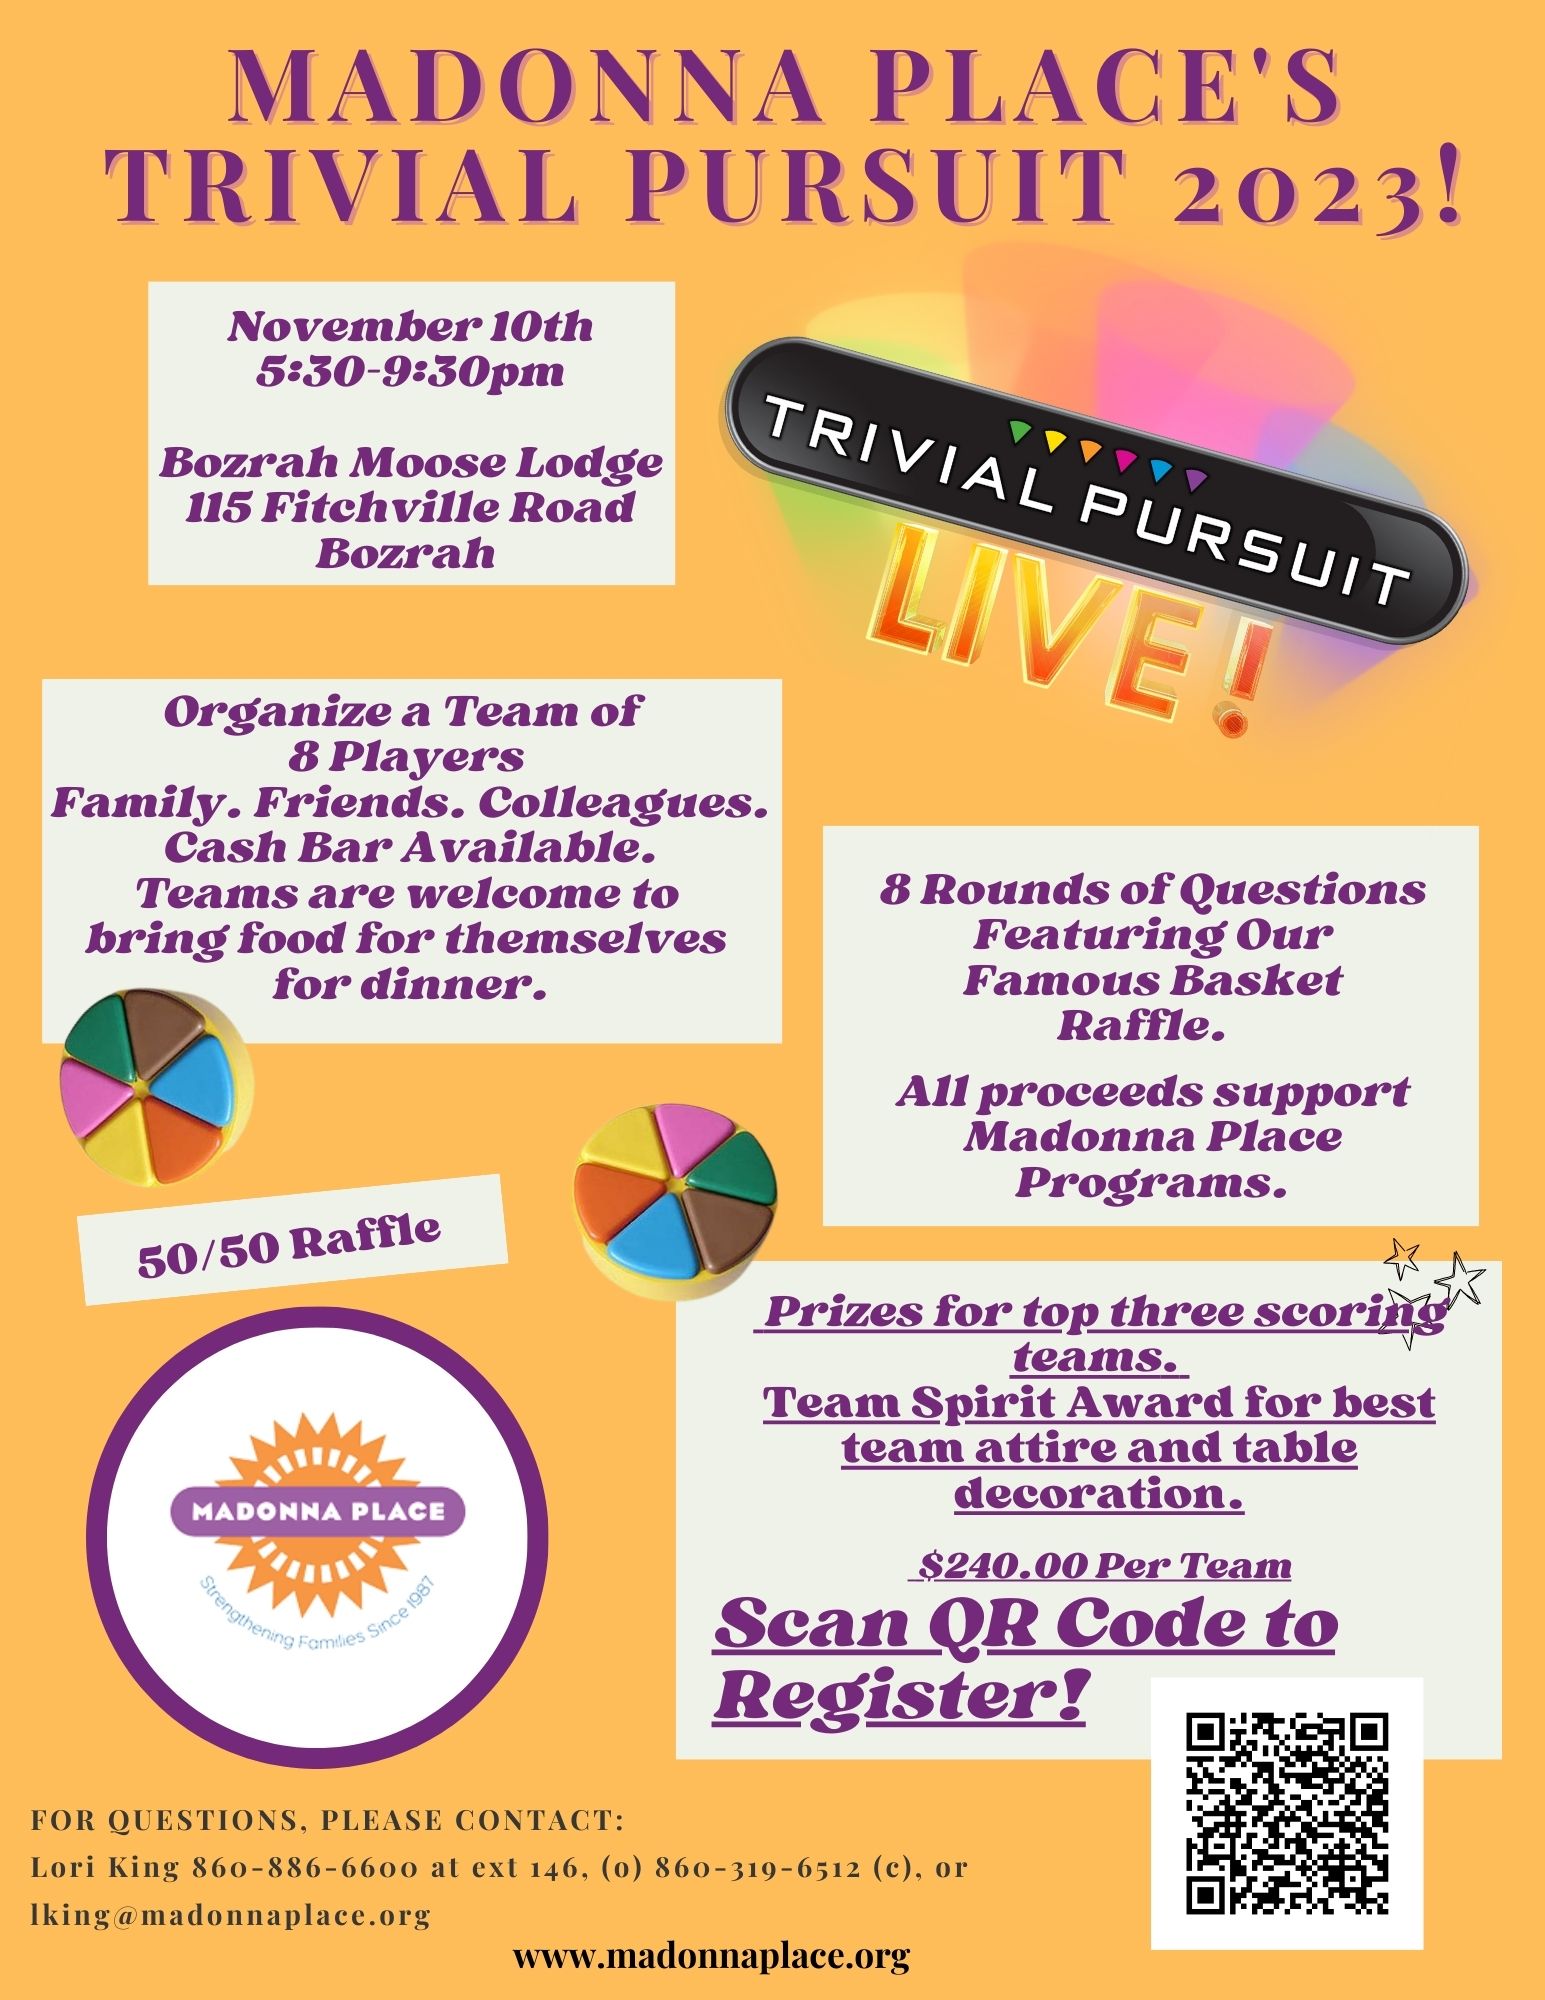 Join us for our 22nd Annual Trivial Pursuit Event at Bozrah Moose Lodge.